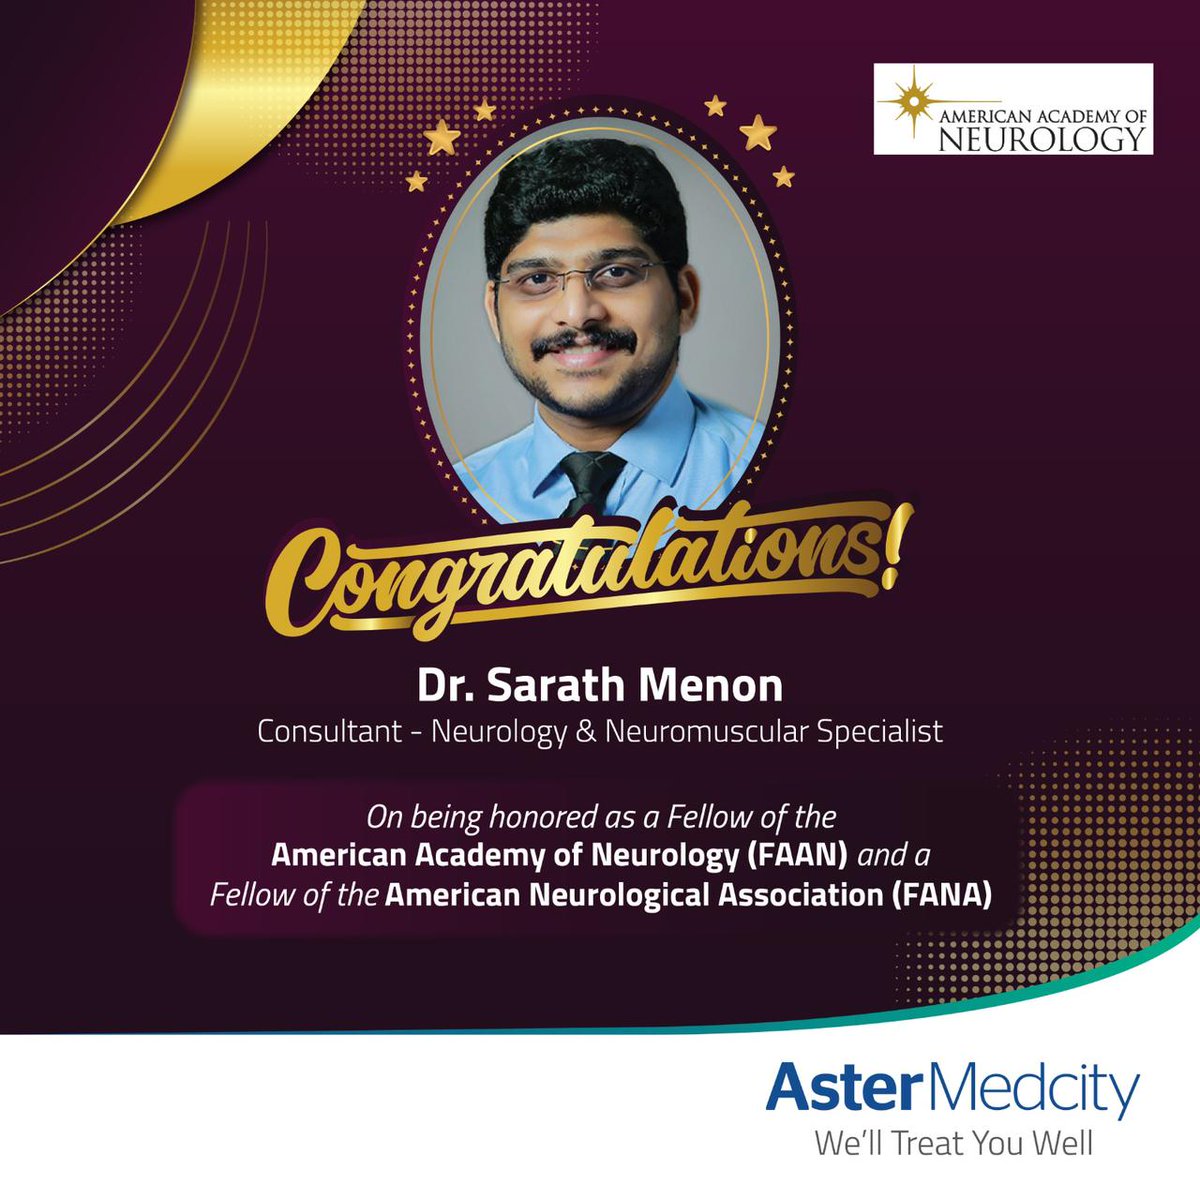 🏆 Dr. Sarath Menon has been bestowed with the prestigious title of Fellow of the American Academy of Neurology (FAAN) and a Fellow of the American Neurological Association (FANA). Let us come together to congratulate and celebrate Dr. Sarath Menon on this momentous achievement!